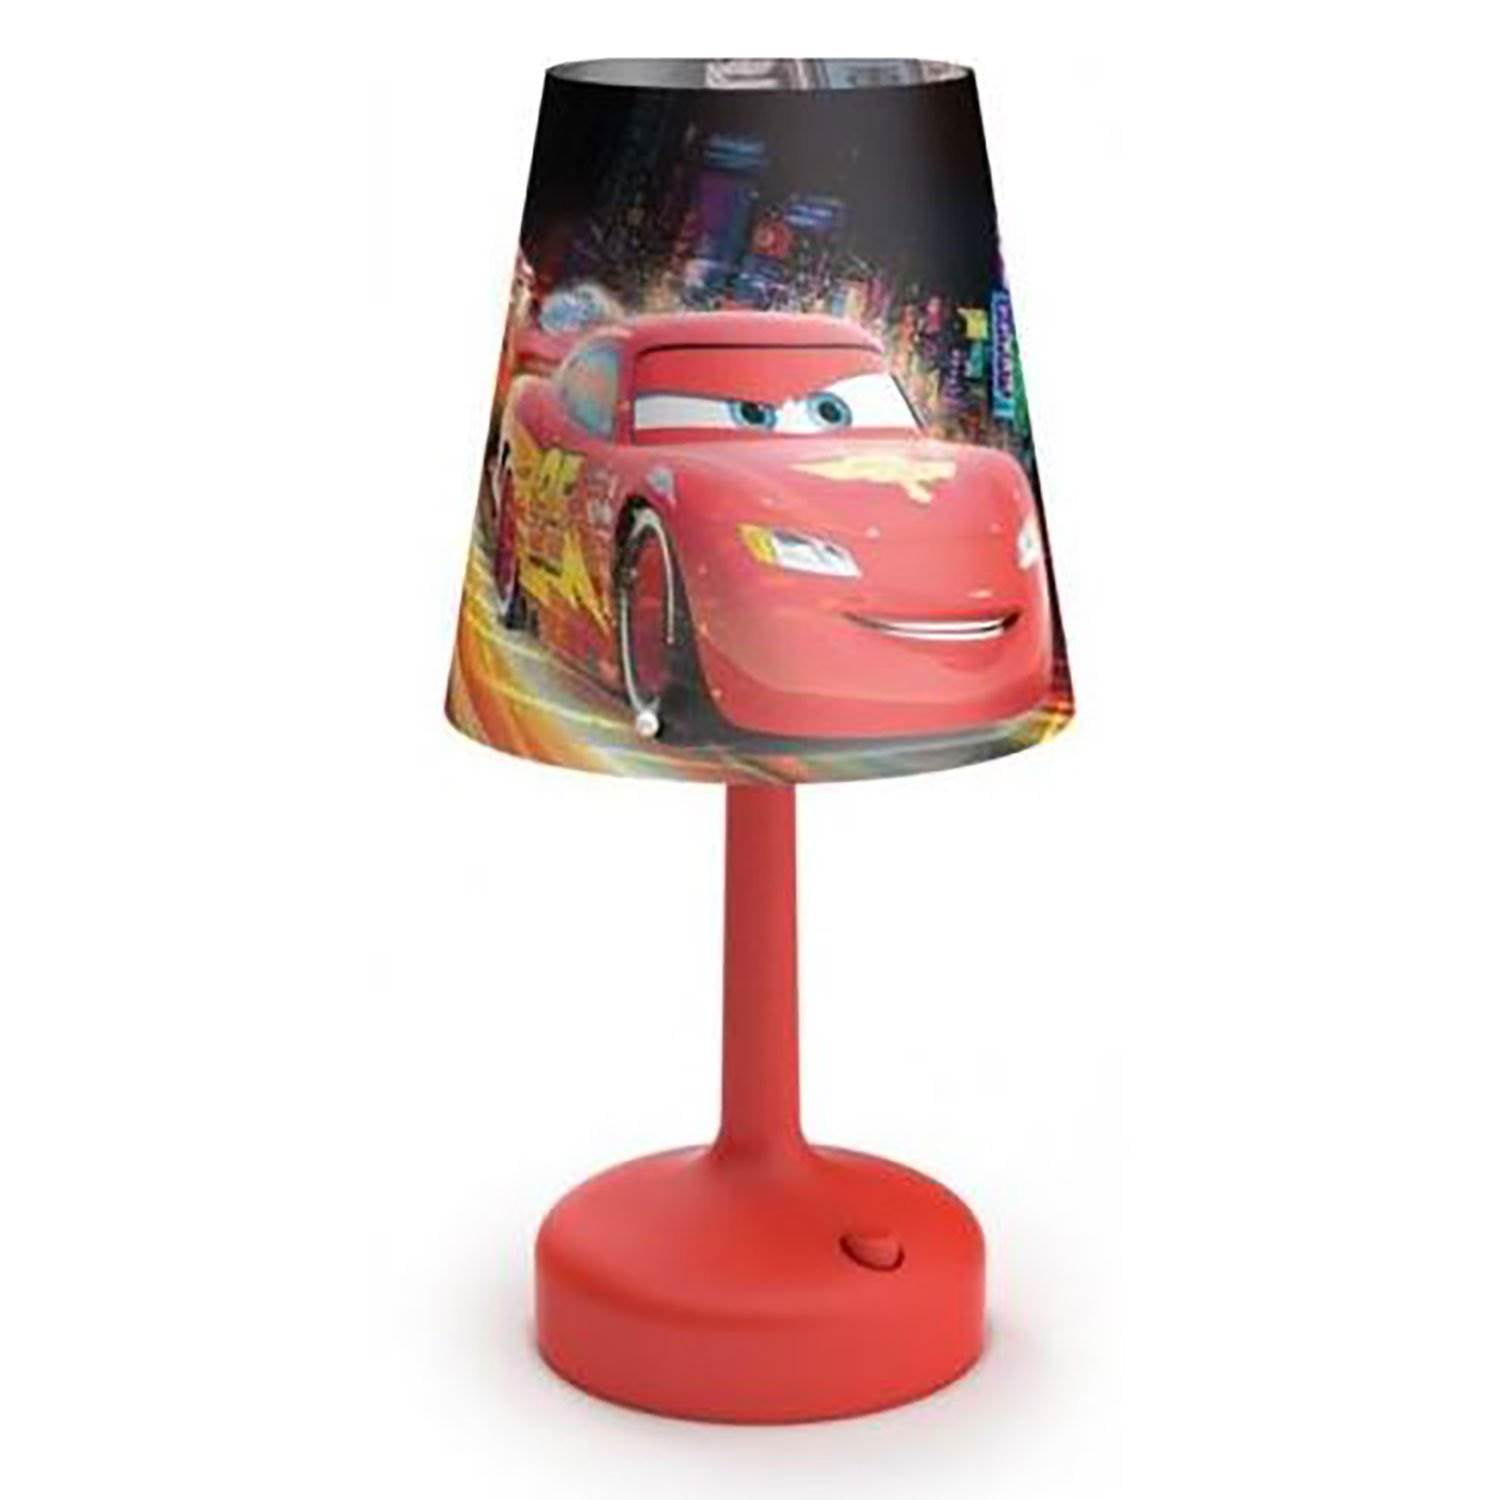 Disney Cars Childrens Lampshades For a Ceiling Light or Table Lamp Pendant 